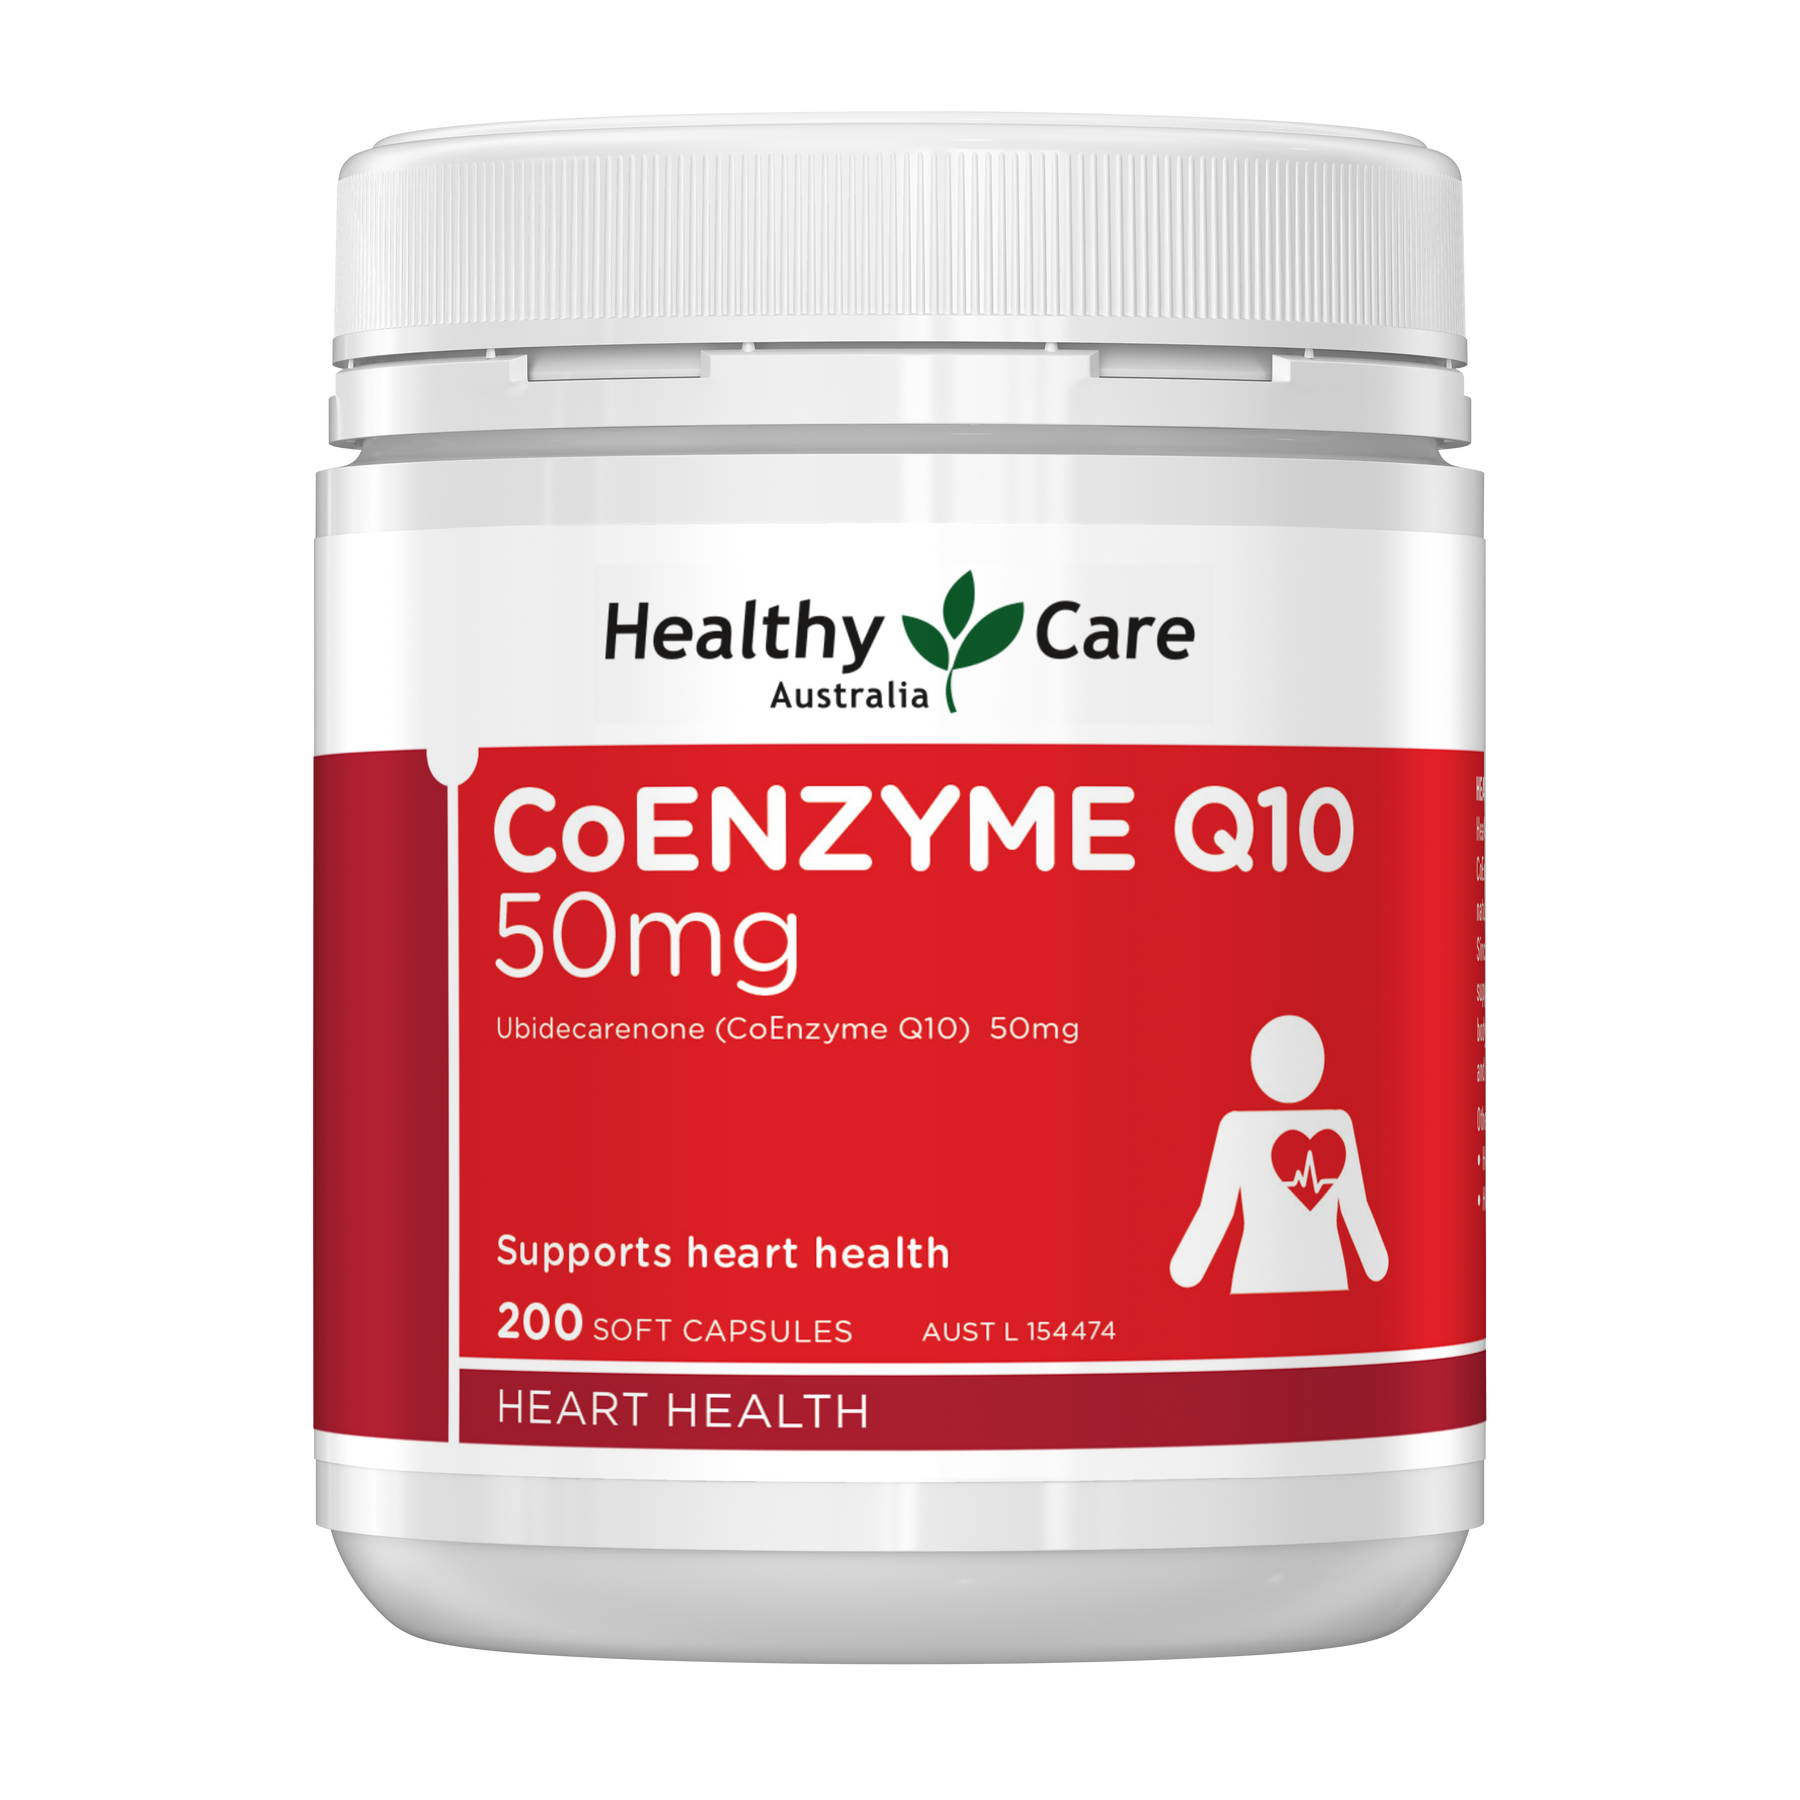 Healthy Care CoEnzyme Q10 50mg 200 Capsules